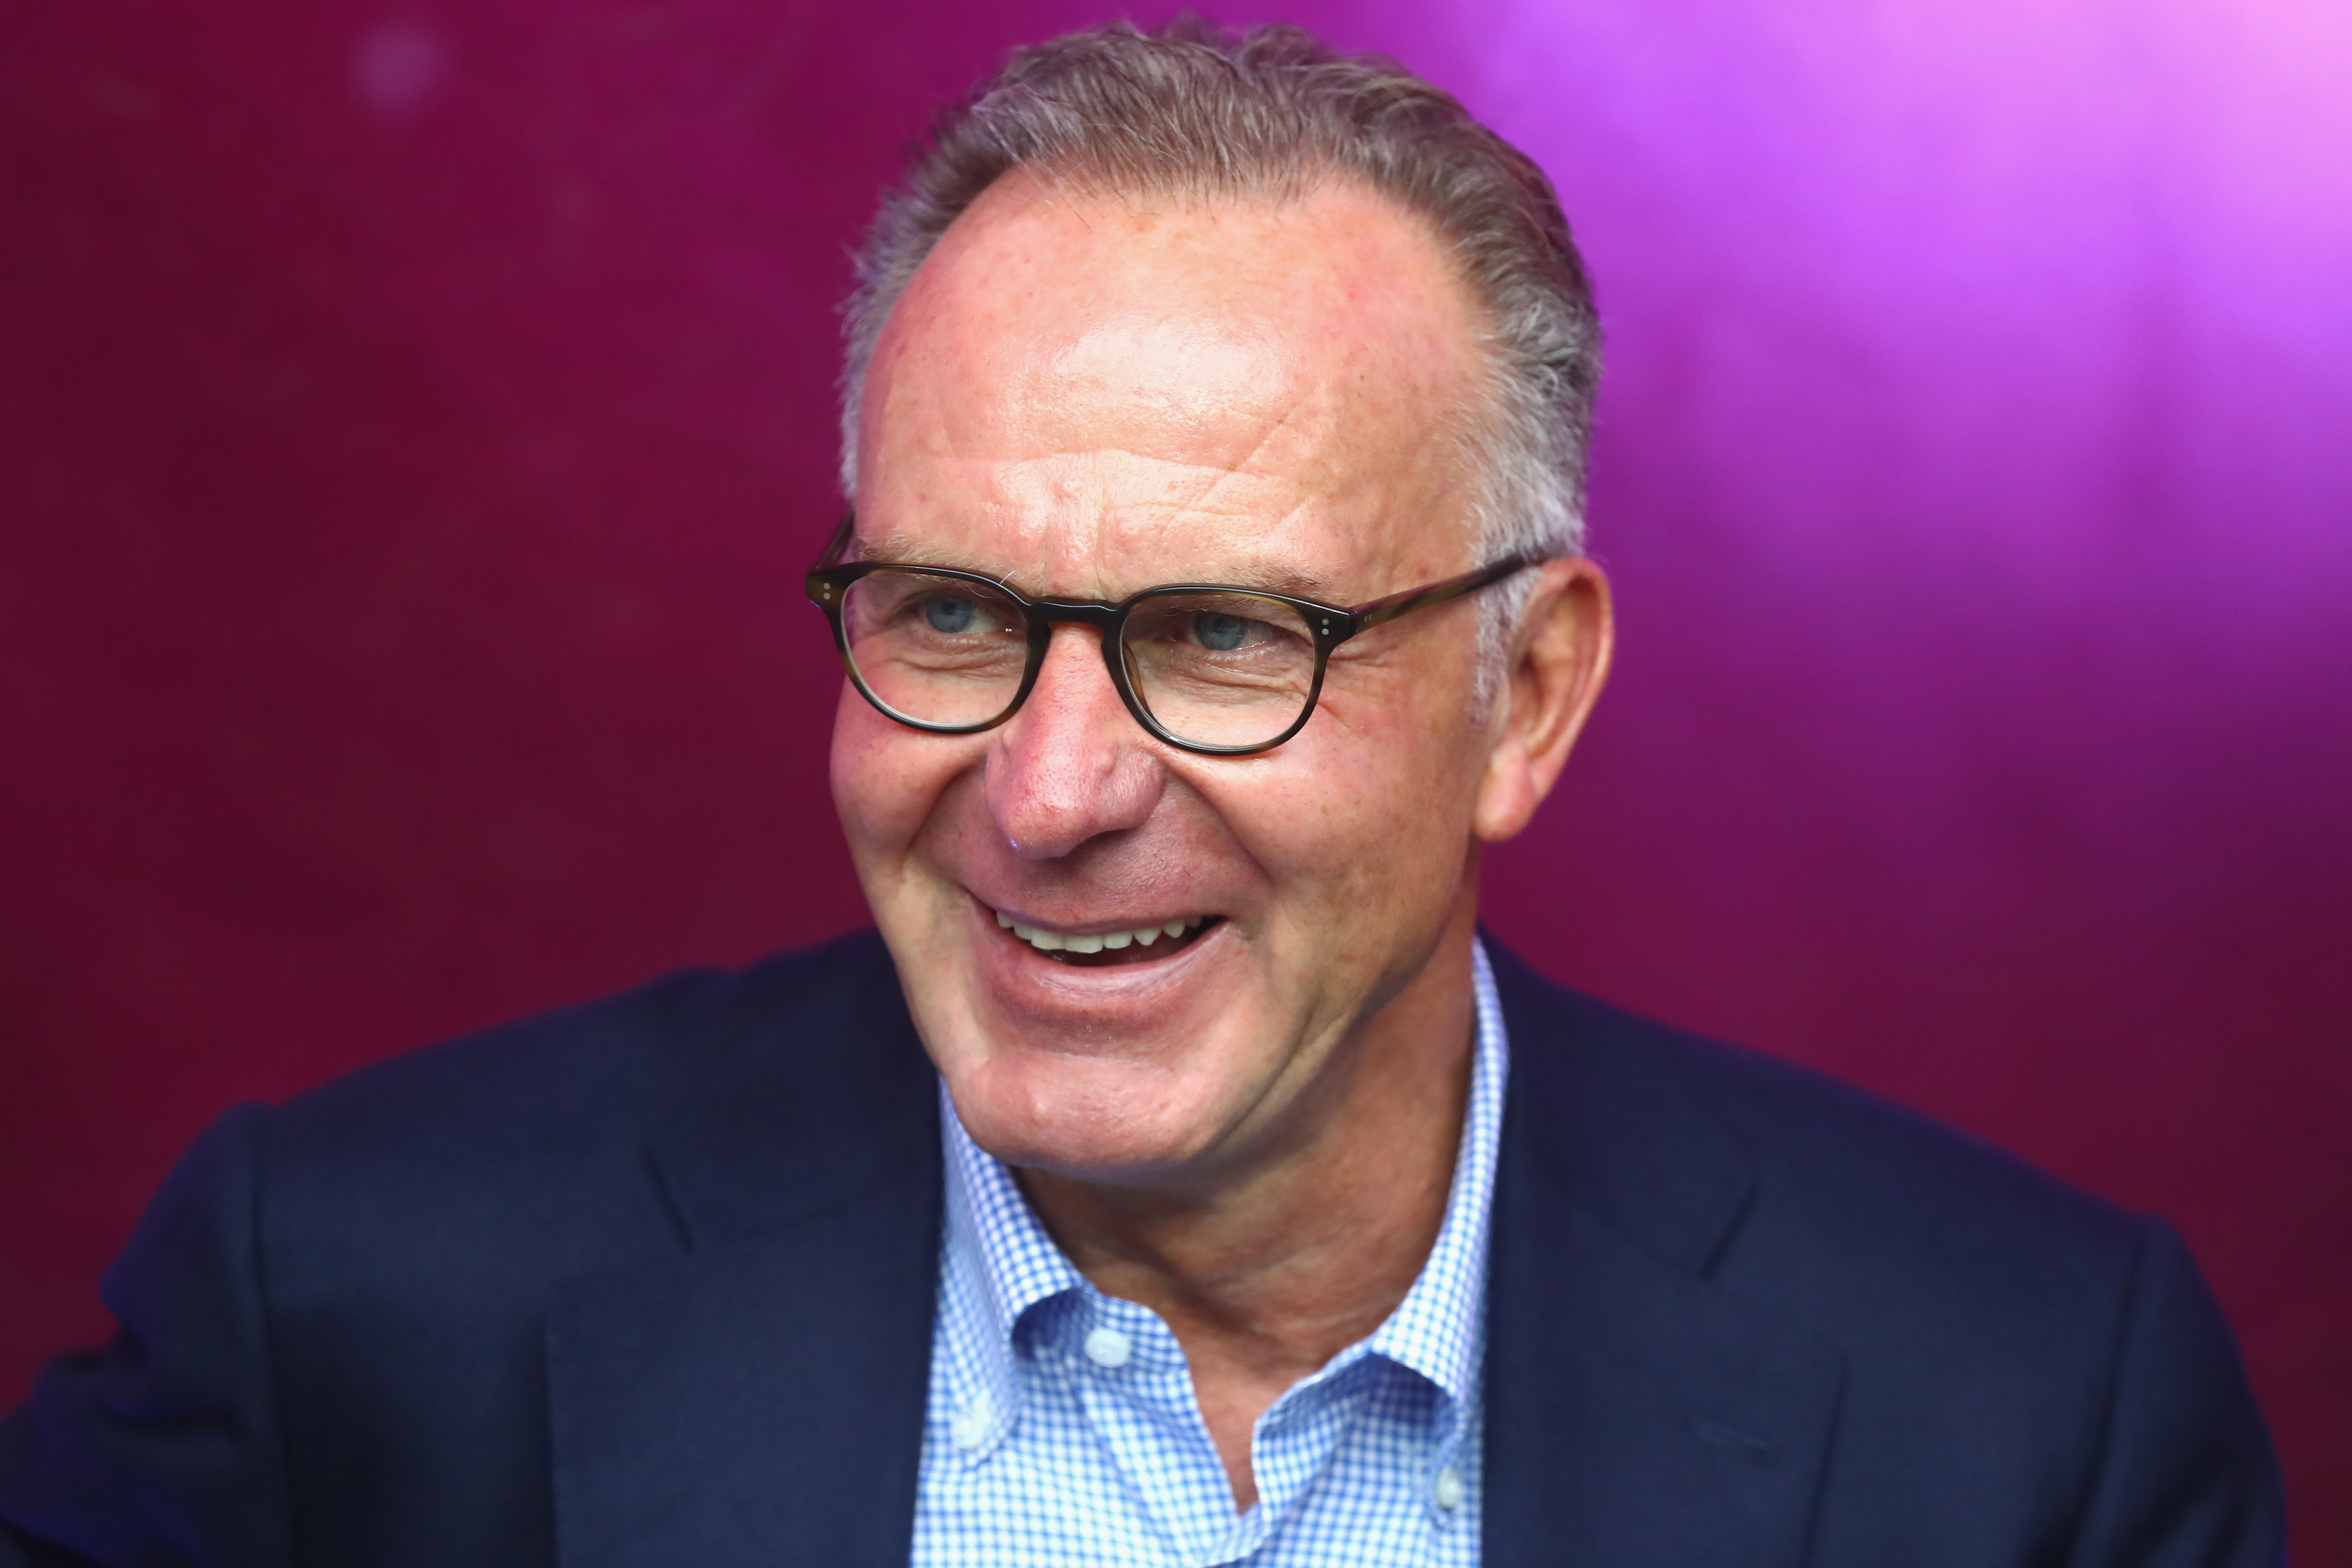 Karl-Heinz Rummenigge: “Maybe It’ll Be The Right Time For Inter To Win The Scudetto”